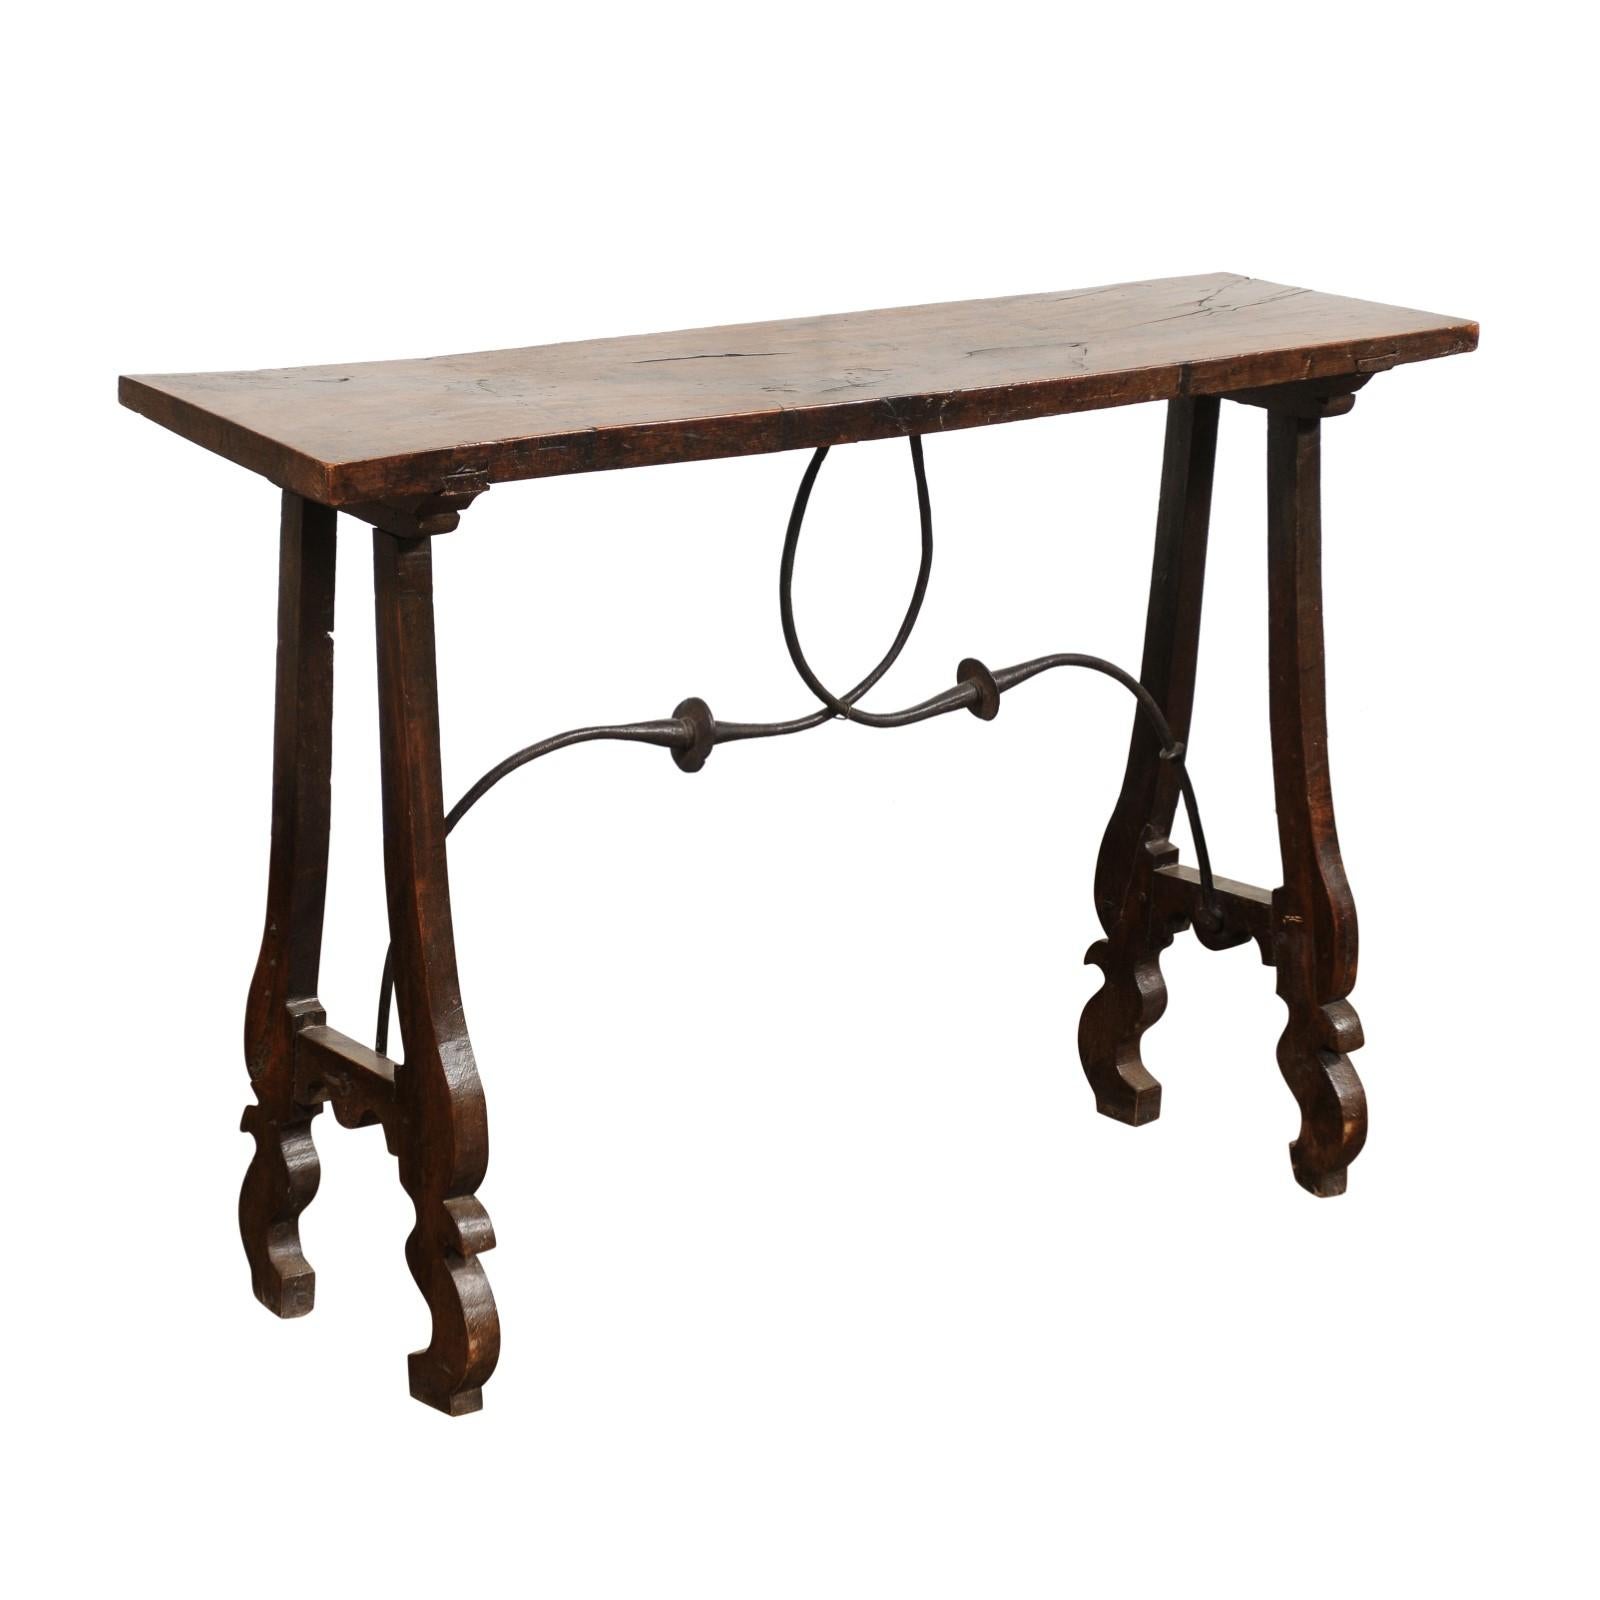 French 19th Century Baroque Walnut Console Table with Lyre Legs and Stretcher